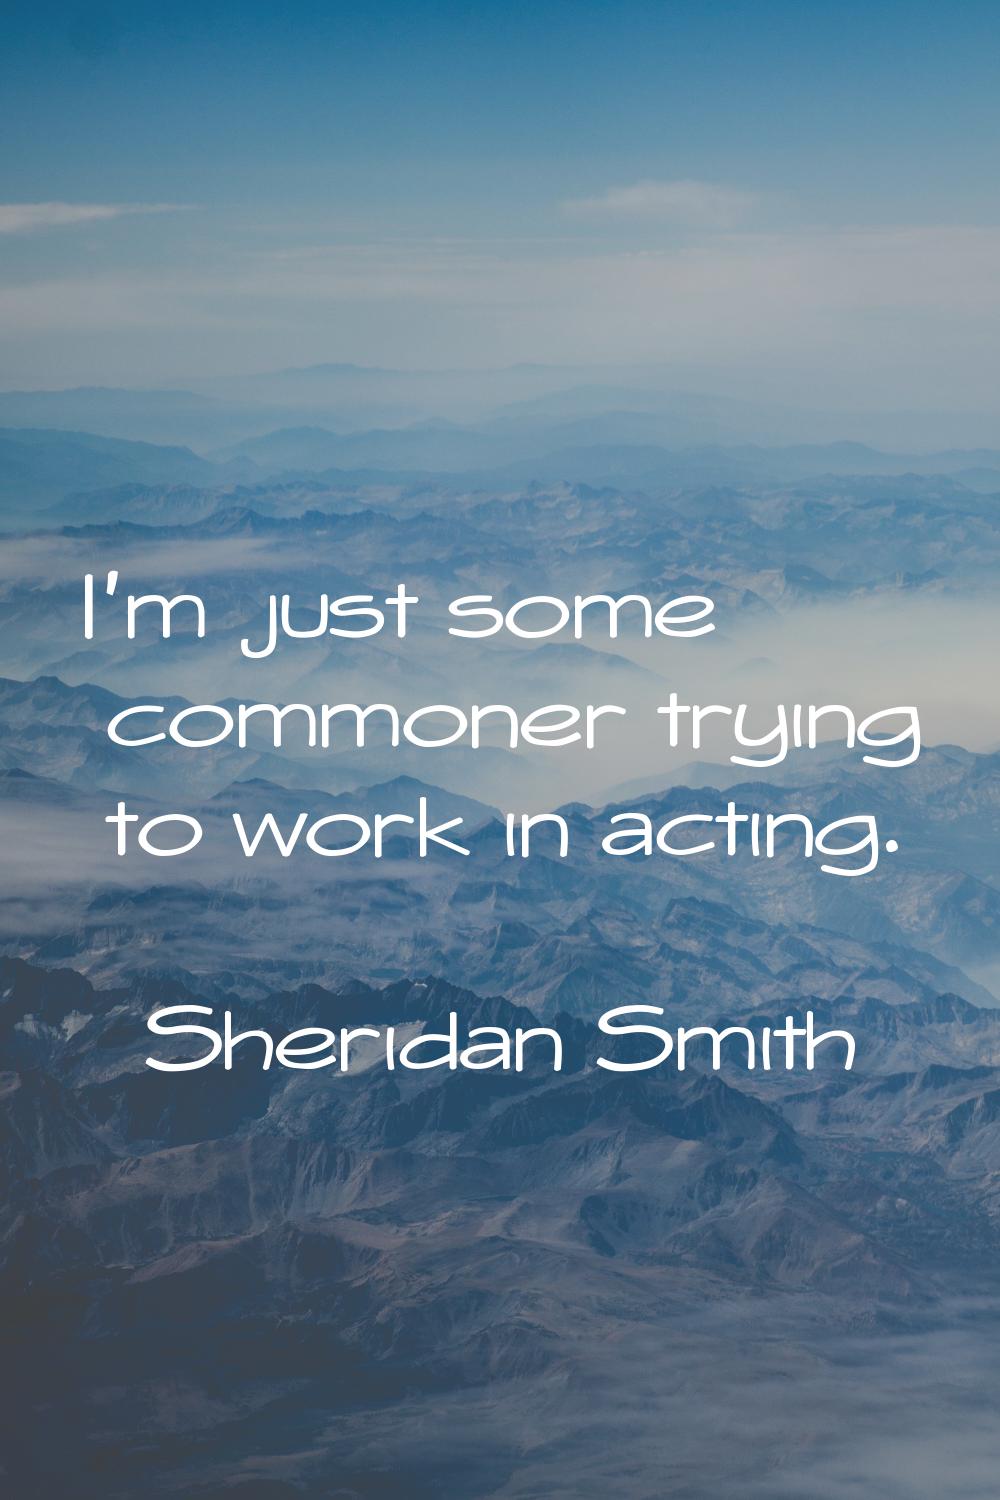 I'm just some commoner trying to work in acting.